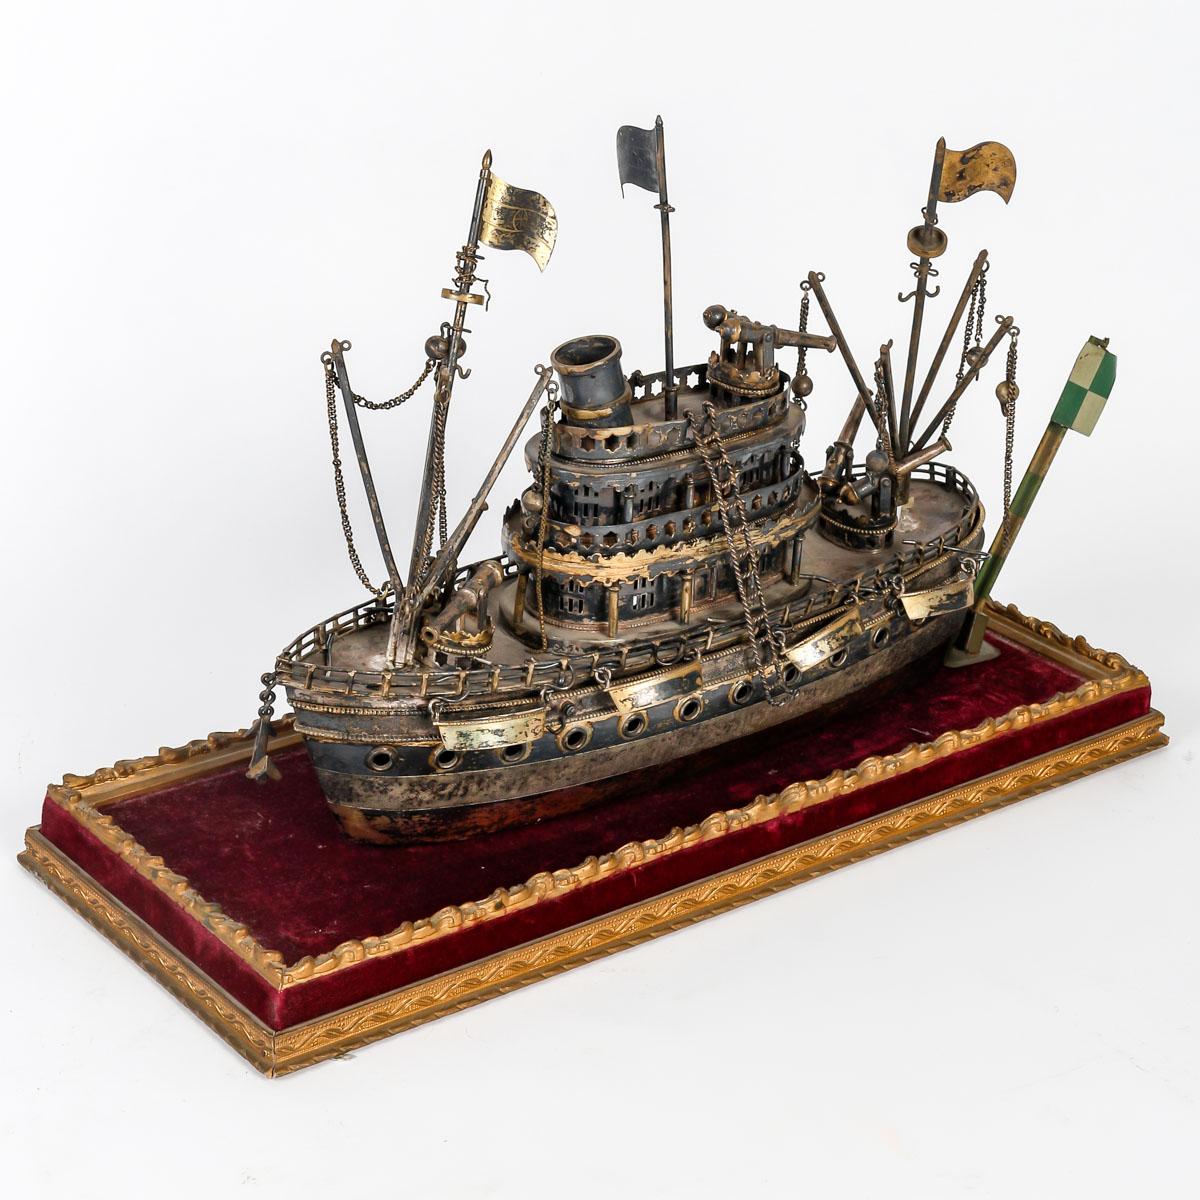 Miniature Army Boat in Sterling Silver, 19th Century, English Work. For Sale 5